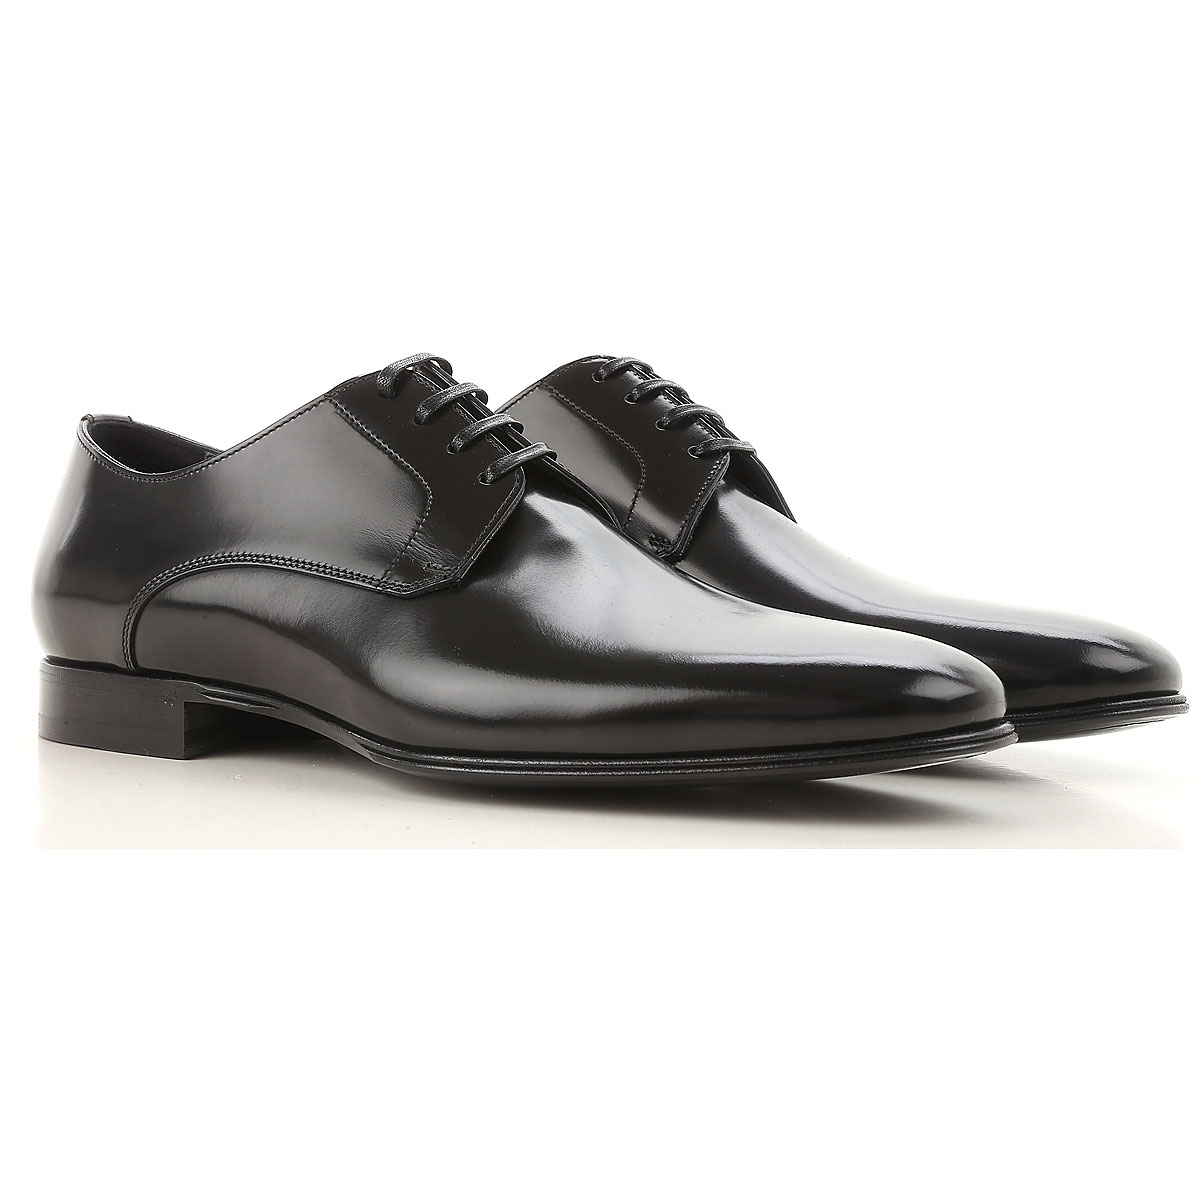 Mens Shoes Dolce & Gabbana, Style code: a10319-ac460-80999